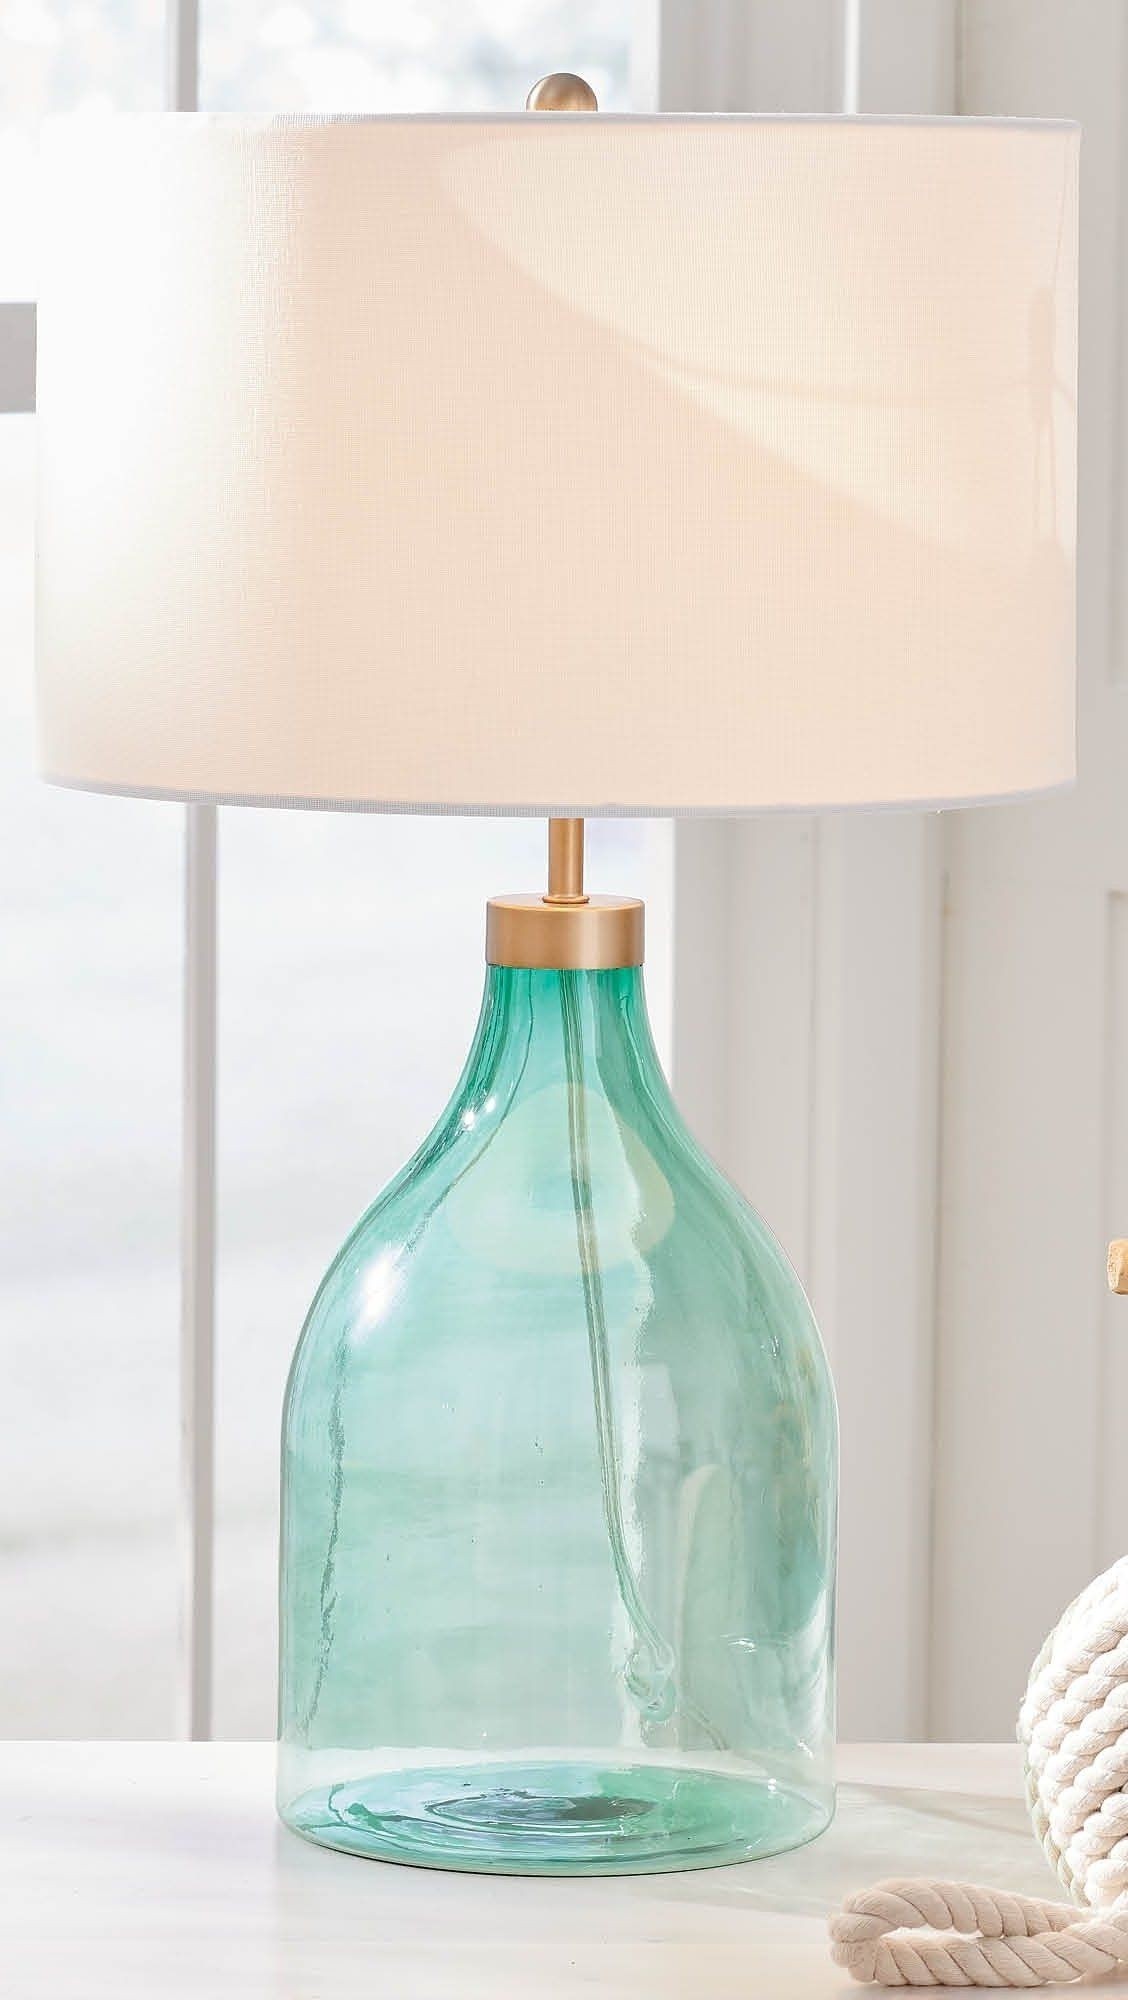 Our sea glass table lamp adds a nice whisper of